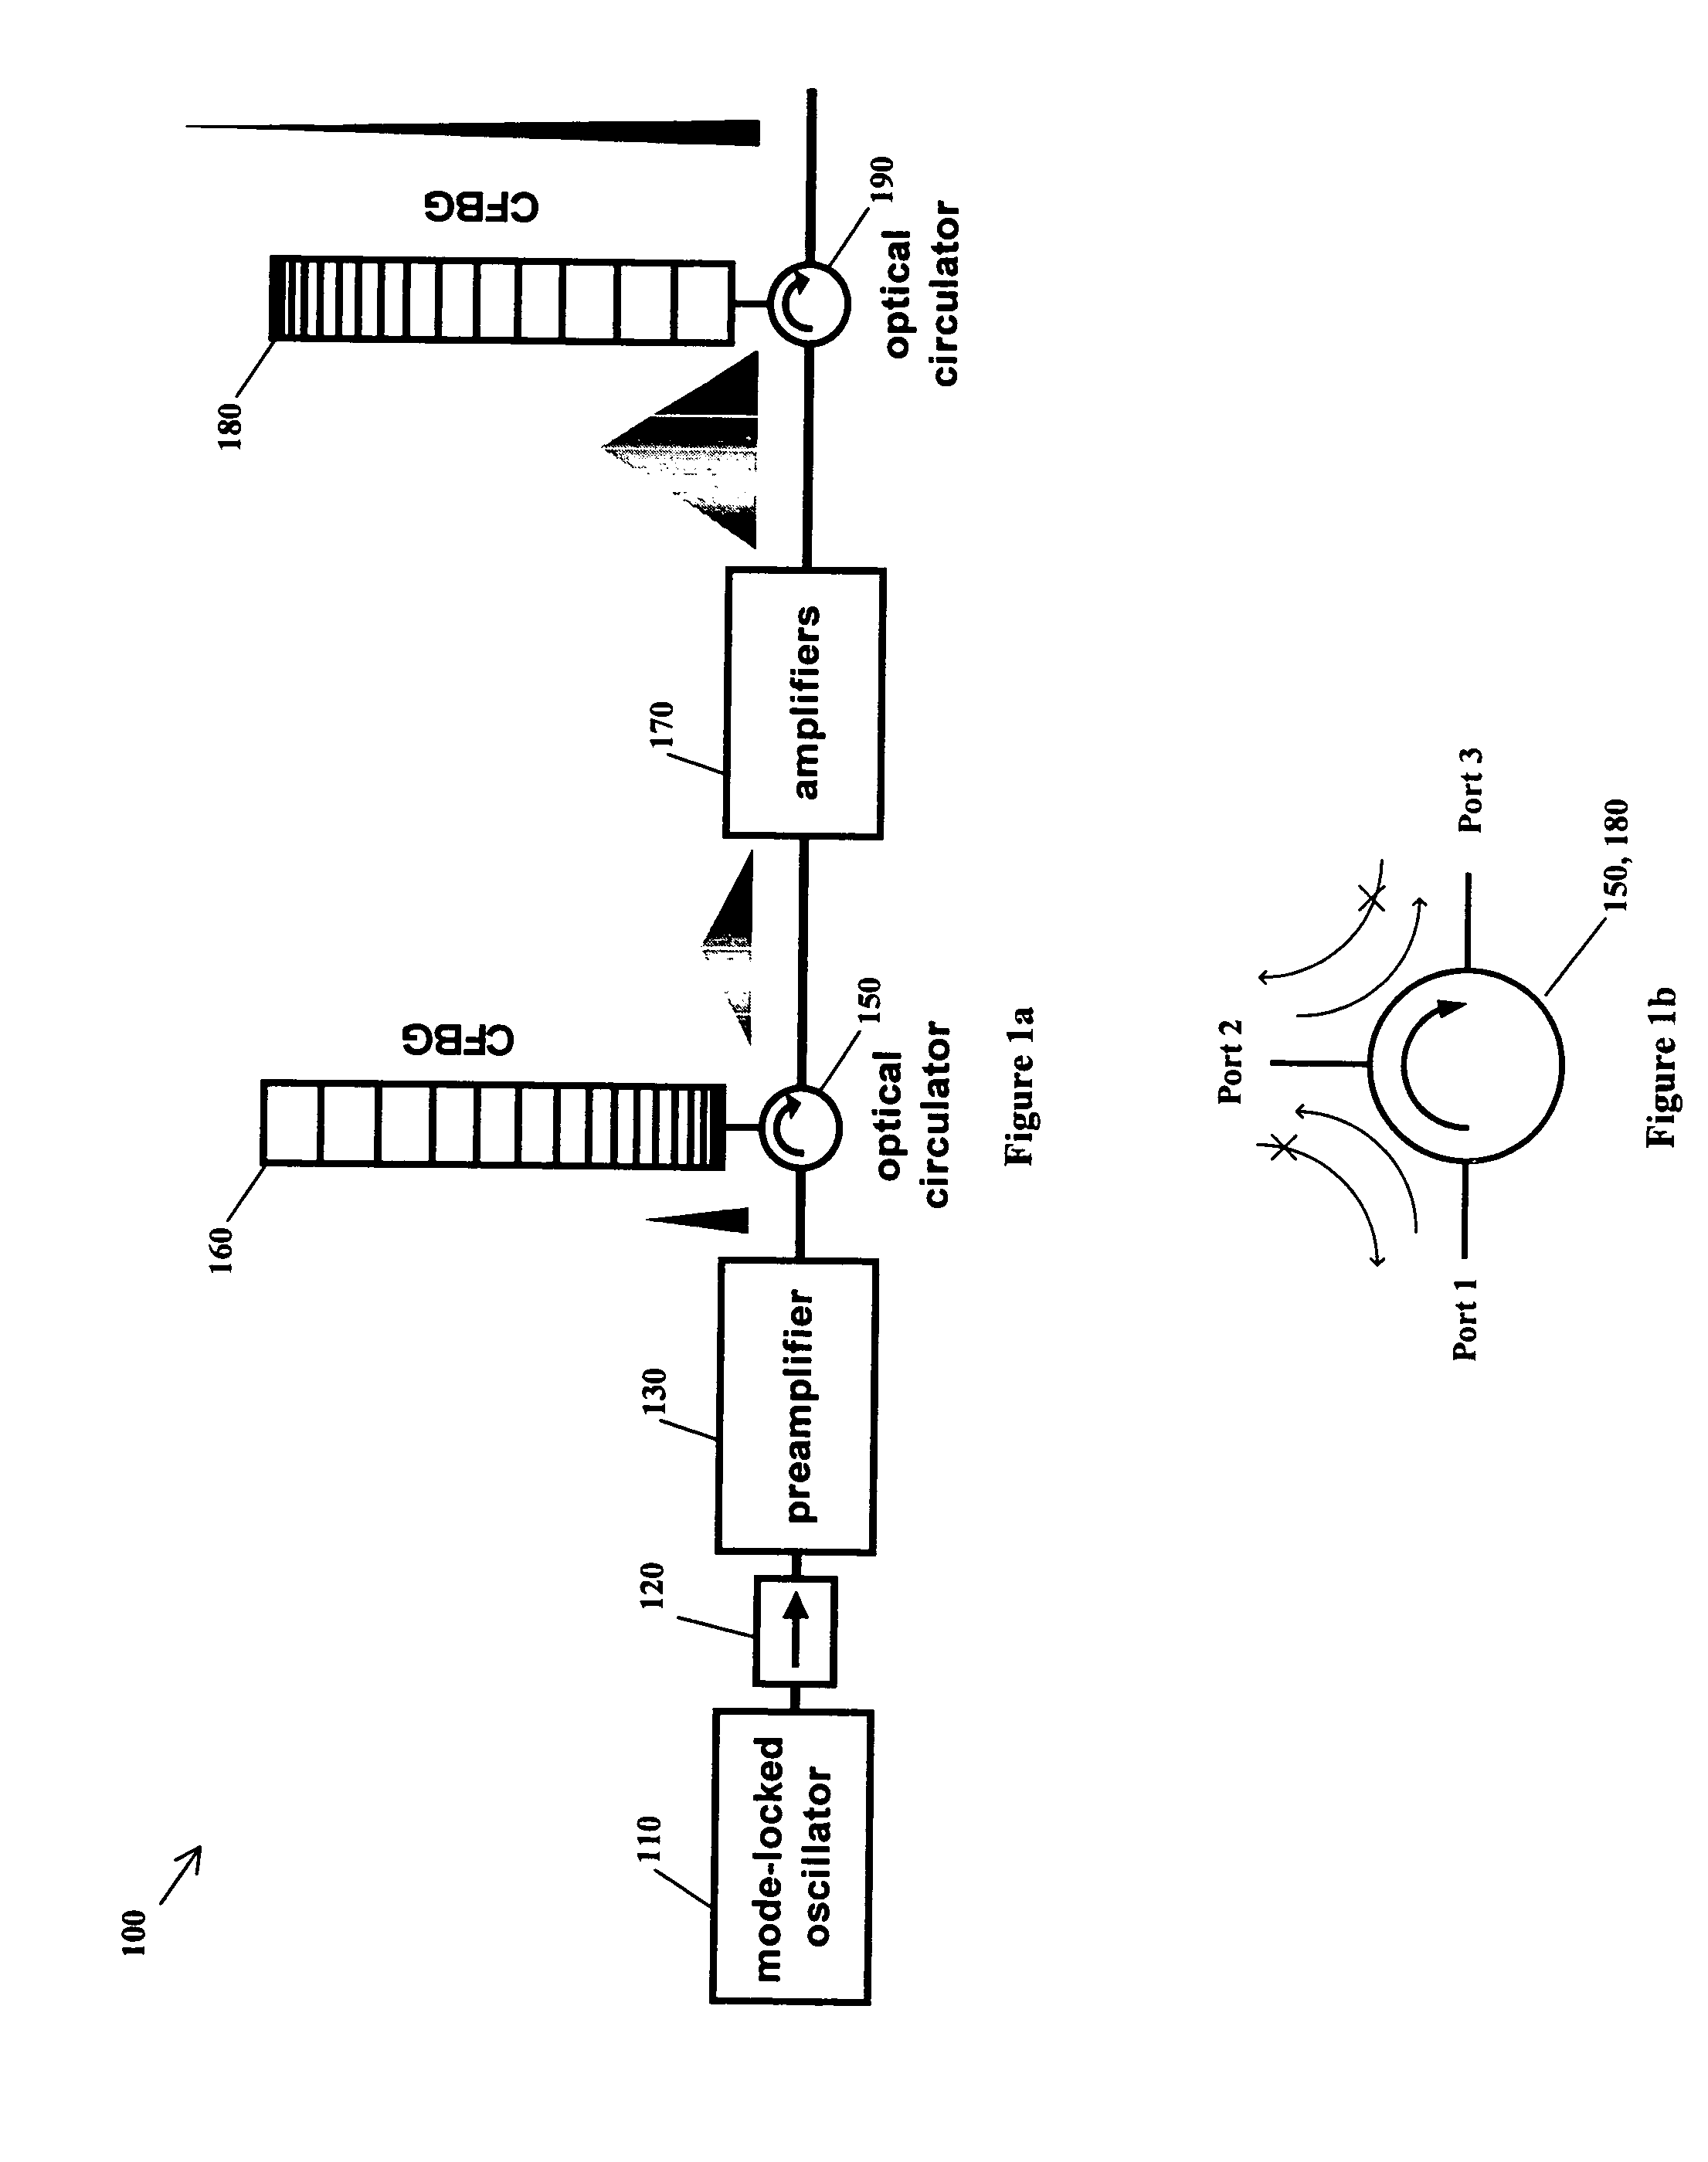 Extreme chirped/stretched pulsed amplification and laser